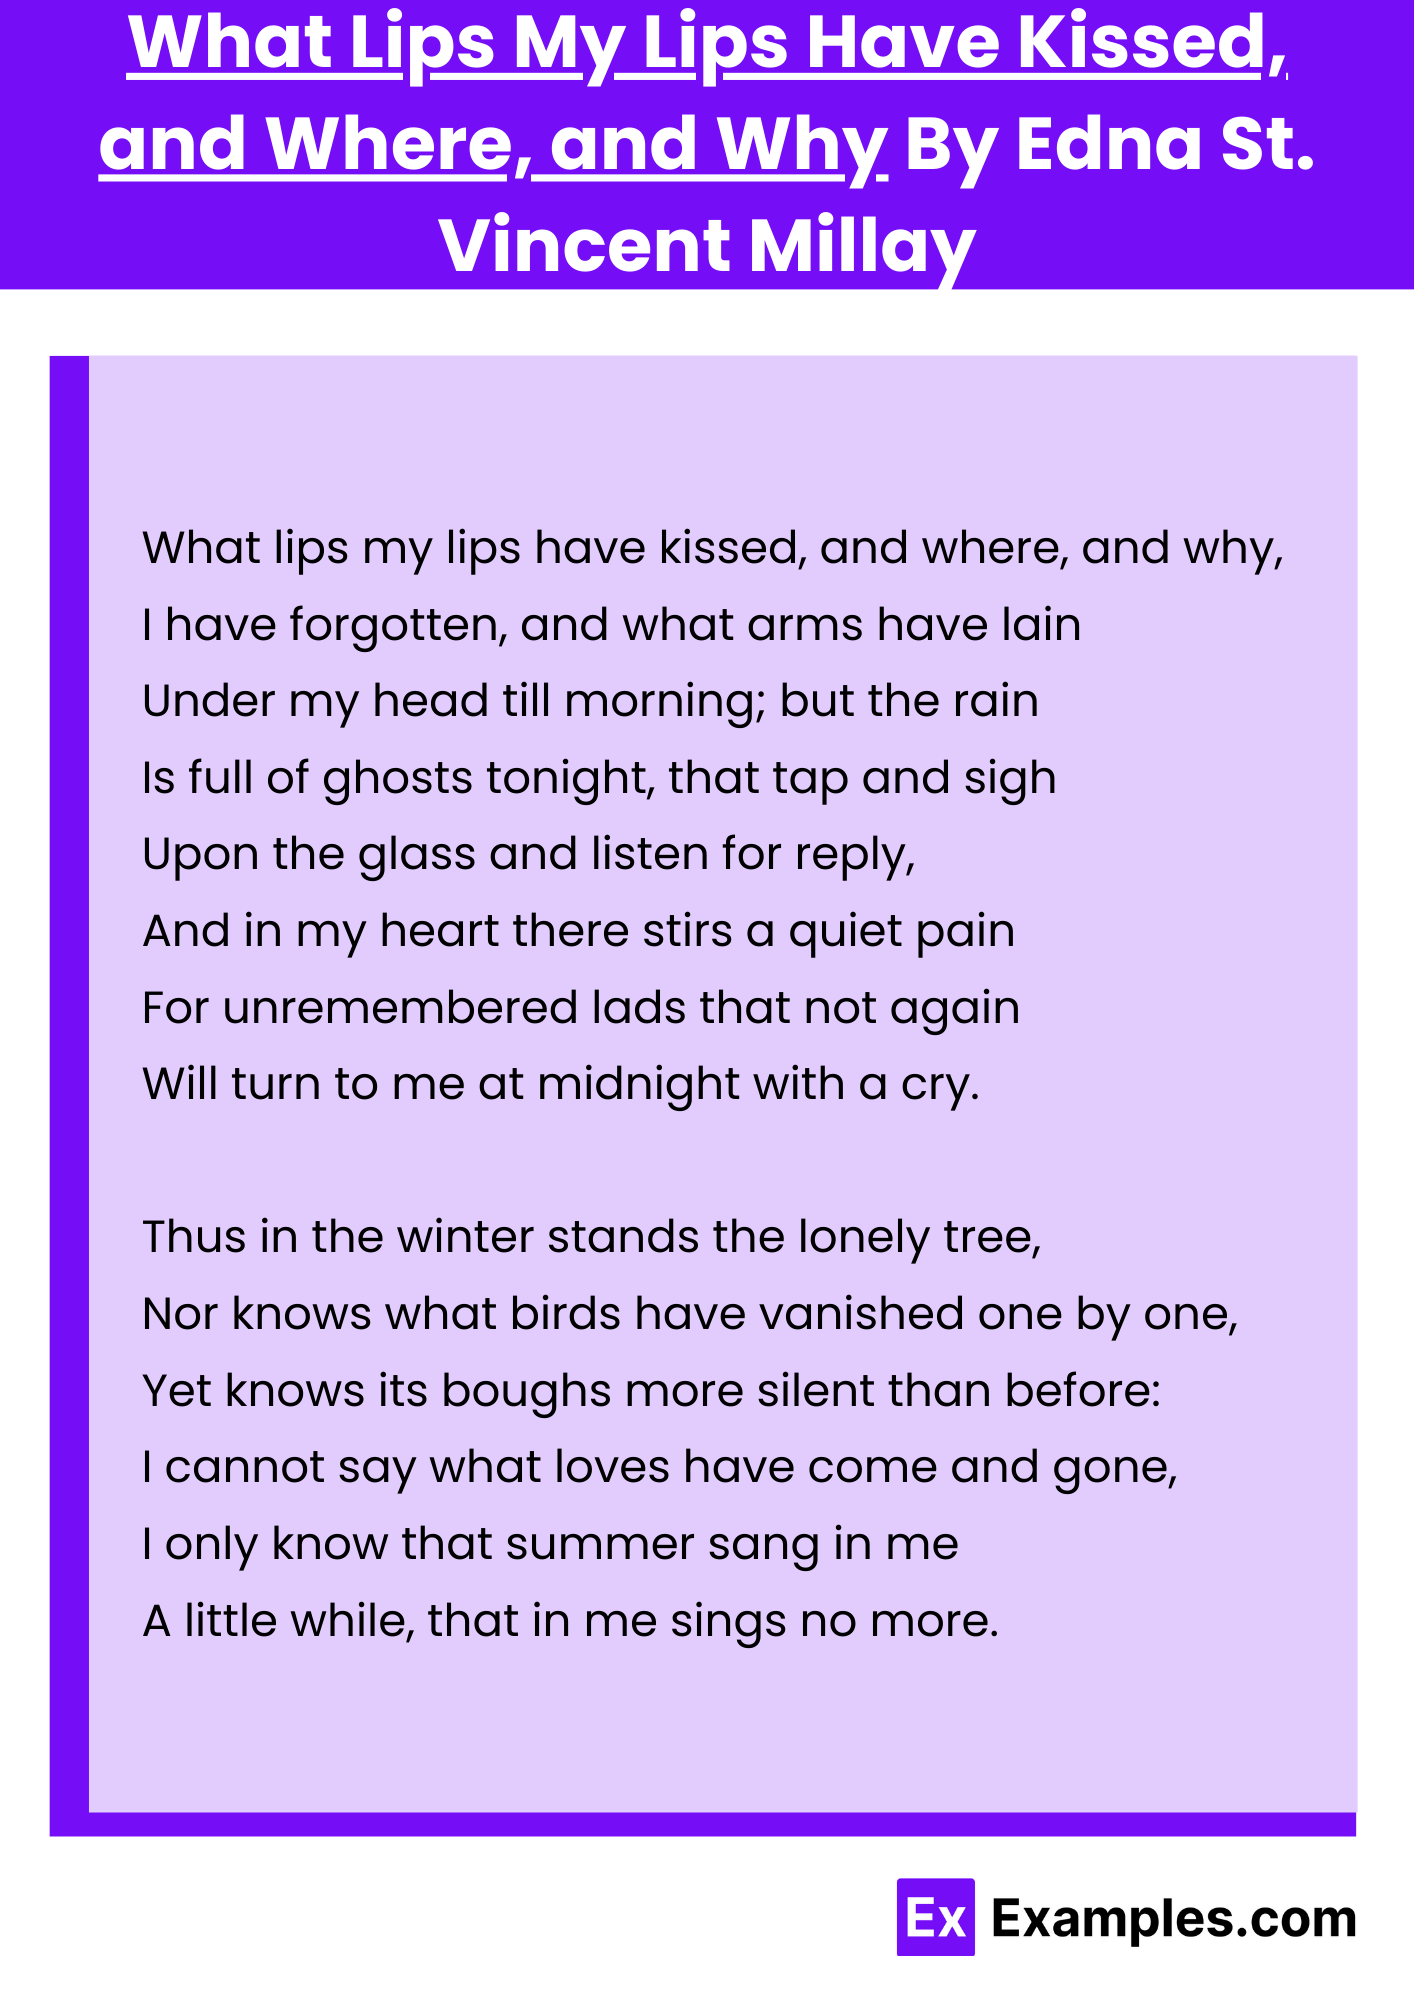 What Lips My Lips Have Kissed, and Where, and Why By Edna St. Vincent Millay